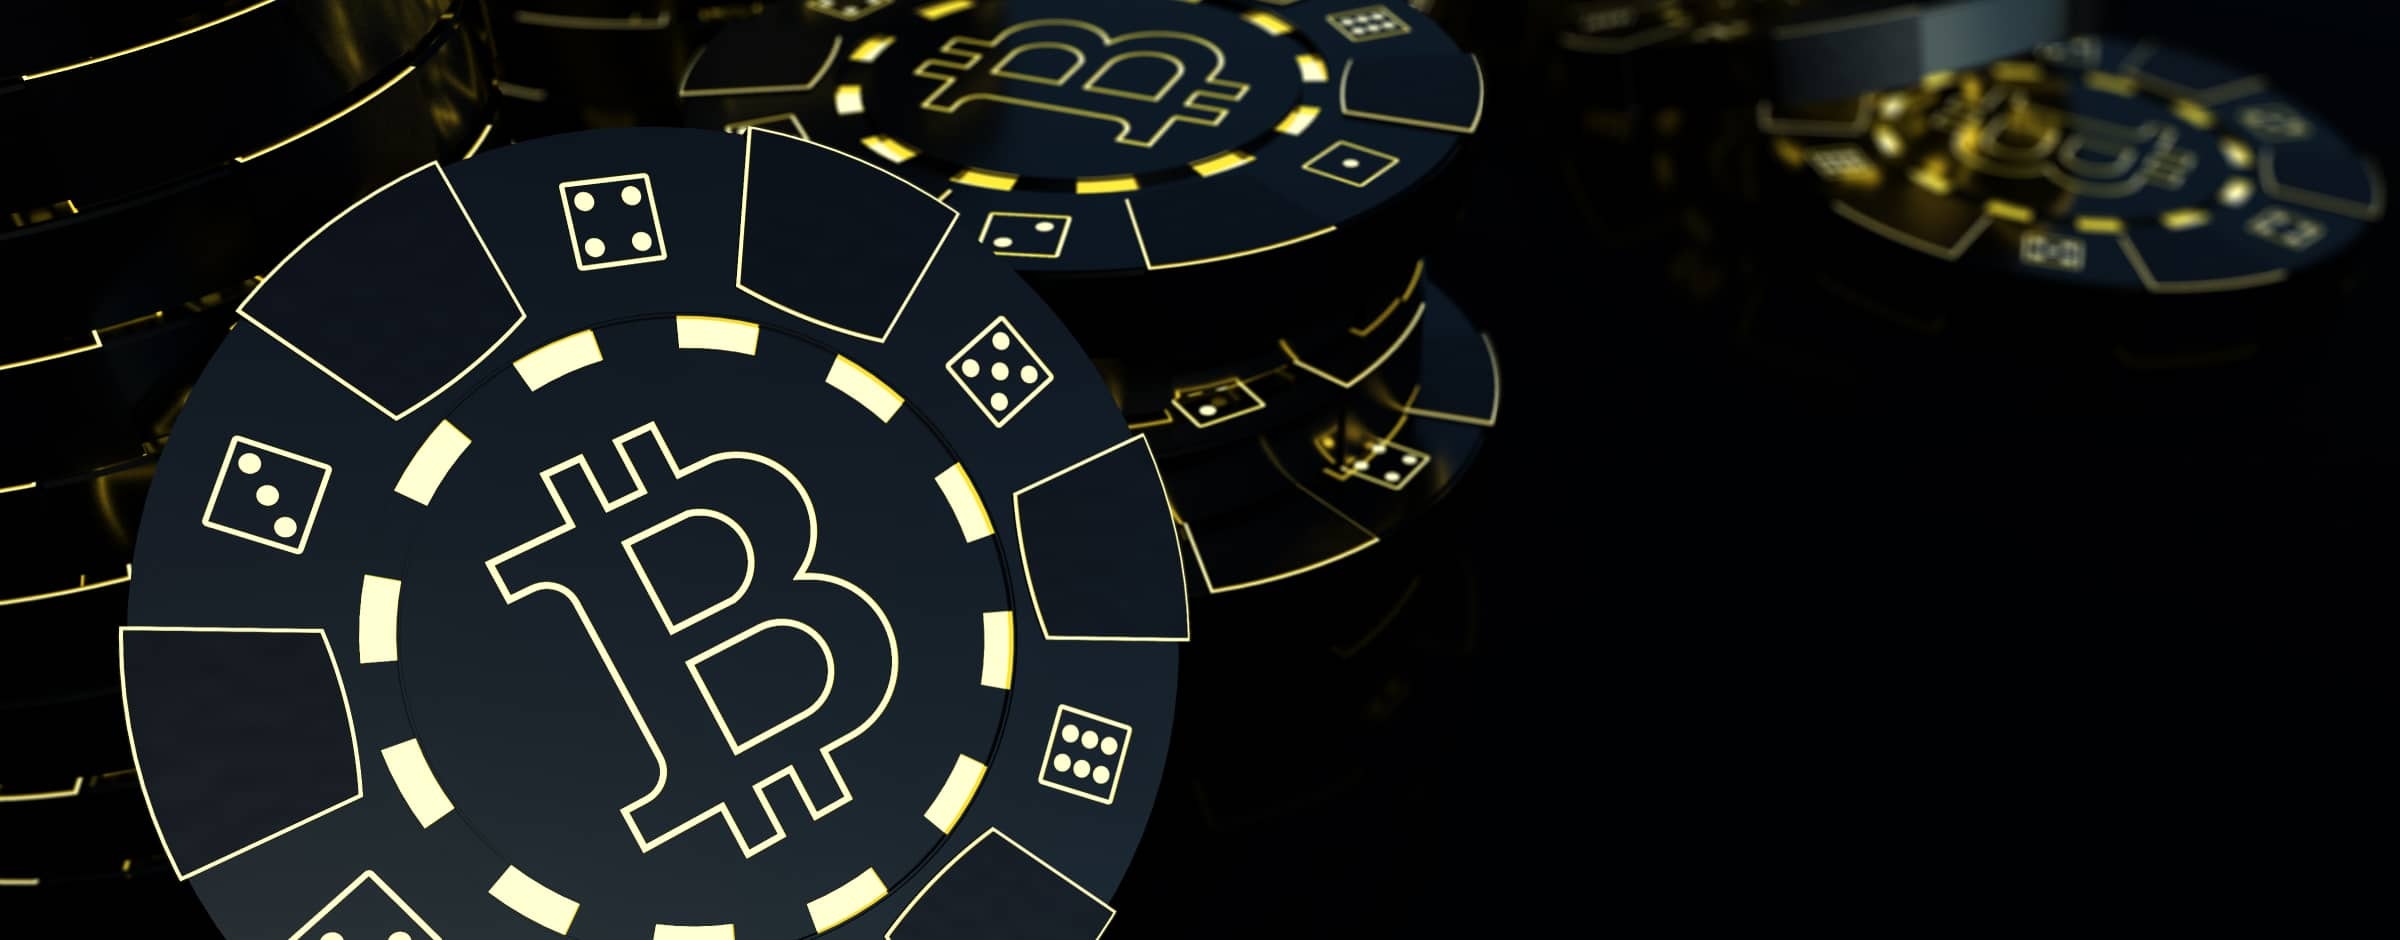 How to Play at a Mobile Bitcoin Casino